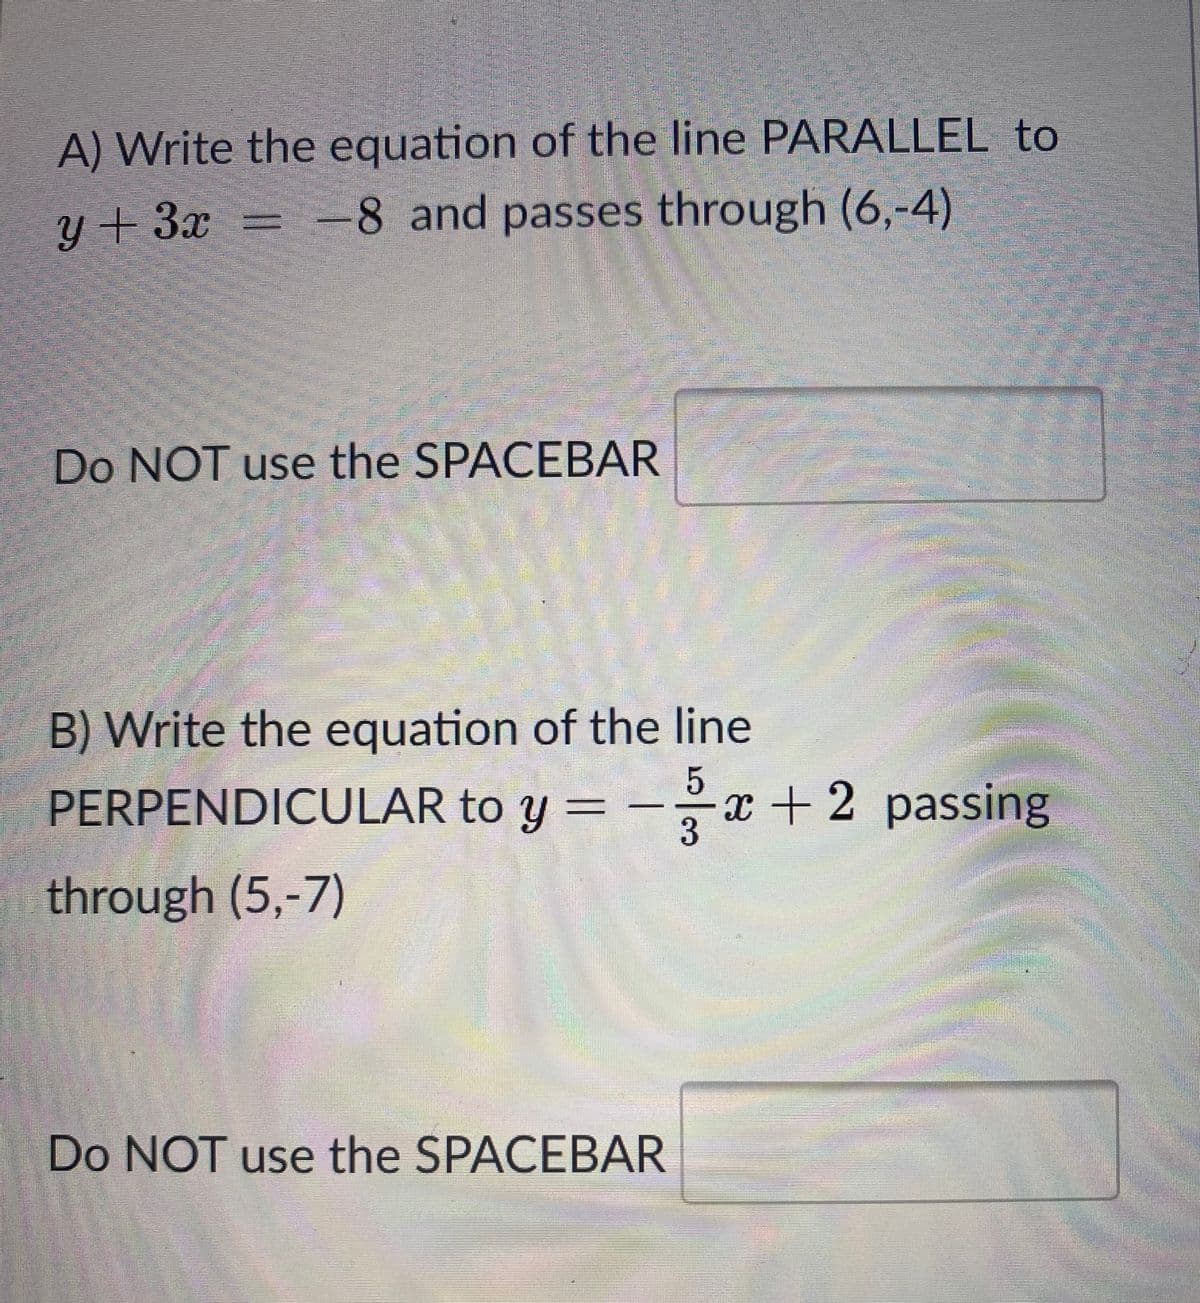 A) Write the equation of the line PARALLEL to
-8 and passes through (6,-4)
y+ 3x
Do NOT use the SPACEBAR
B) Write the equation of the line
PERPENDICULAR to y = -x + 2 passing
3
through (5,-7)
Do NOT use the SPACEBAR
